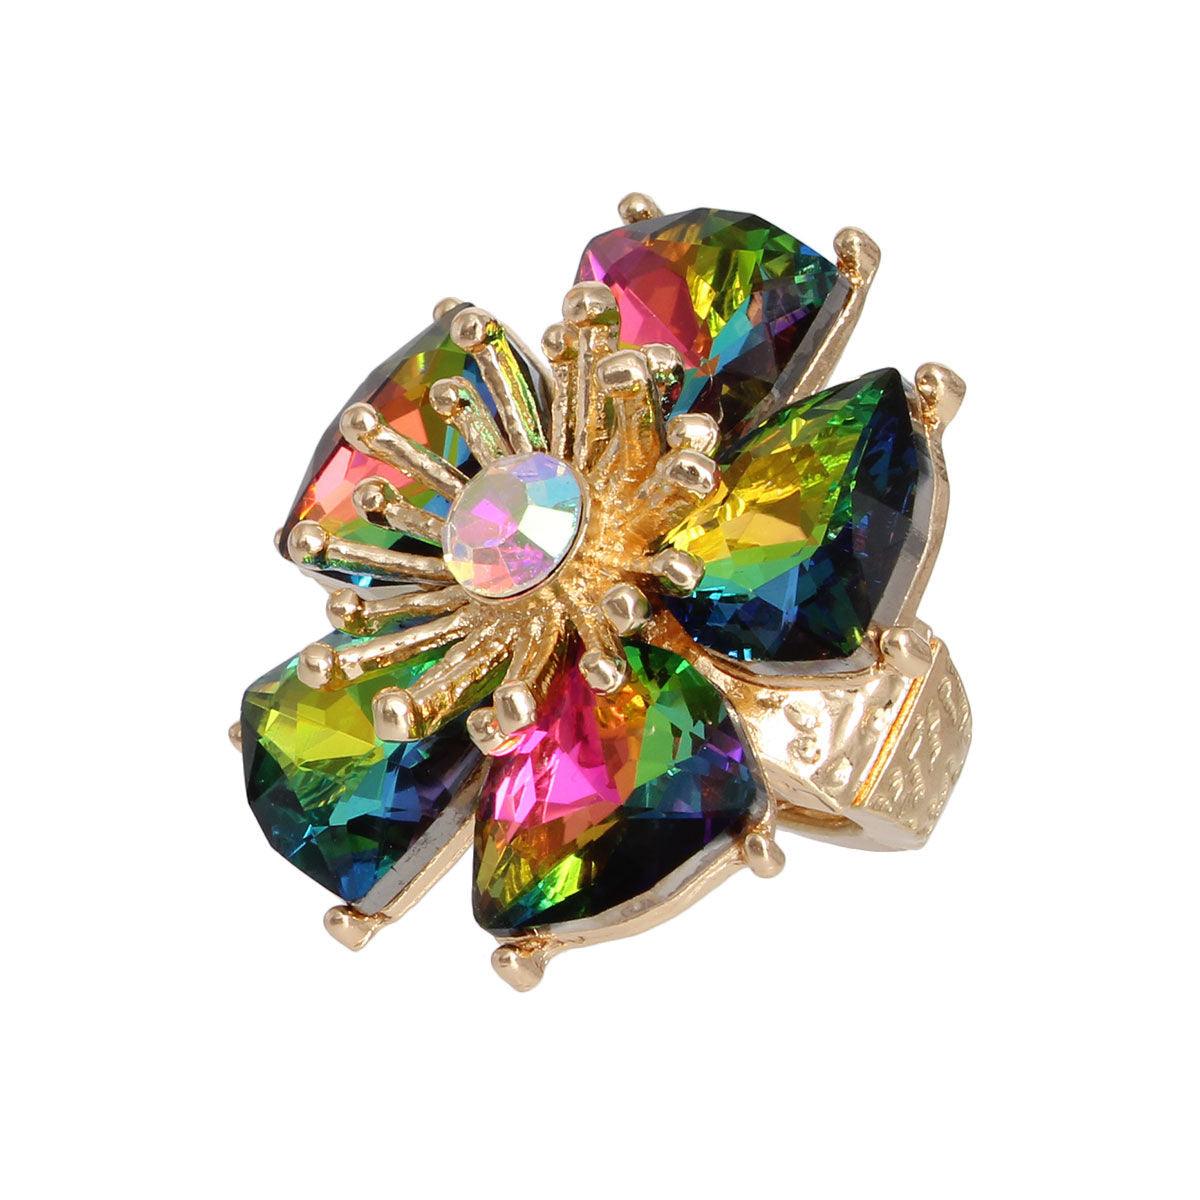 Complete Your Look with a Pink-Green Flower Cocktail Ring